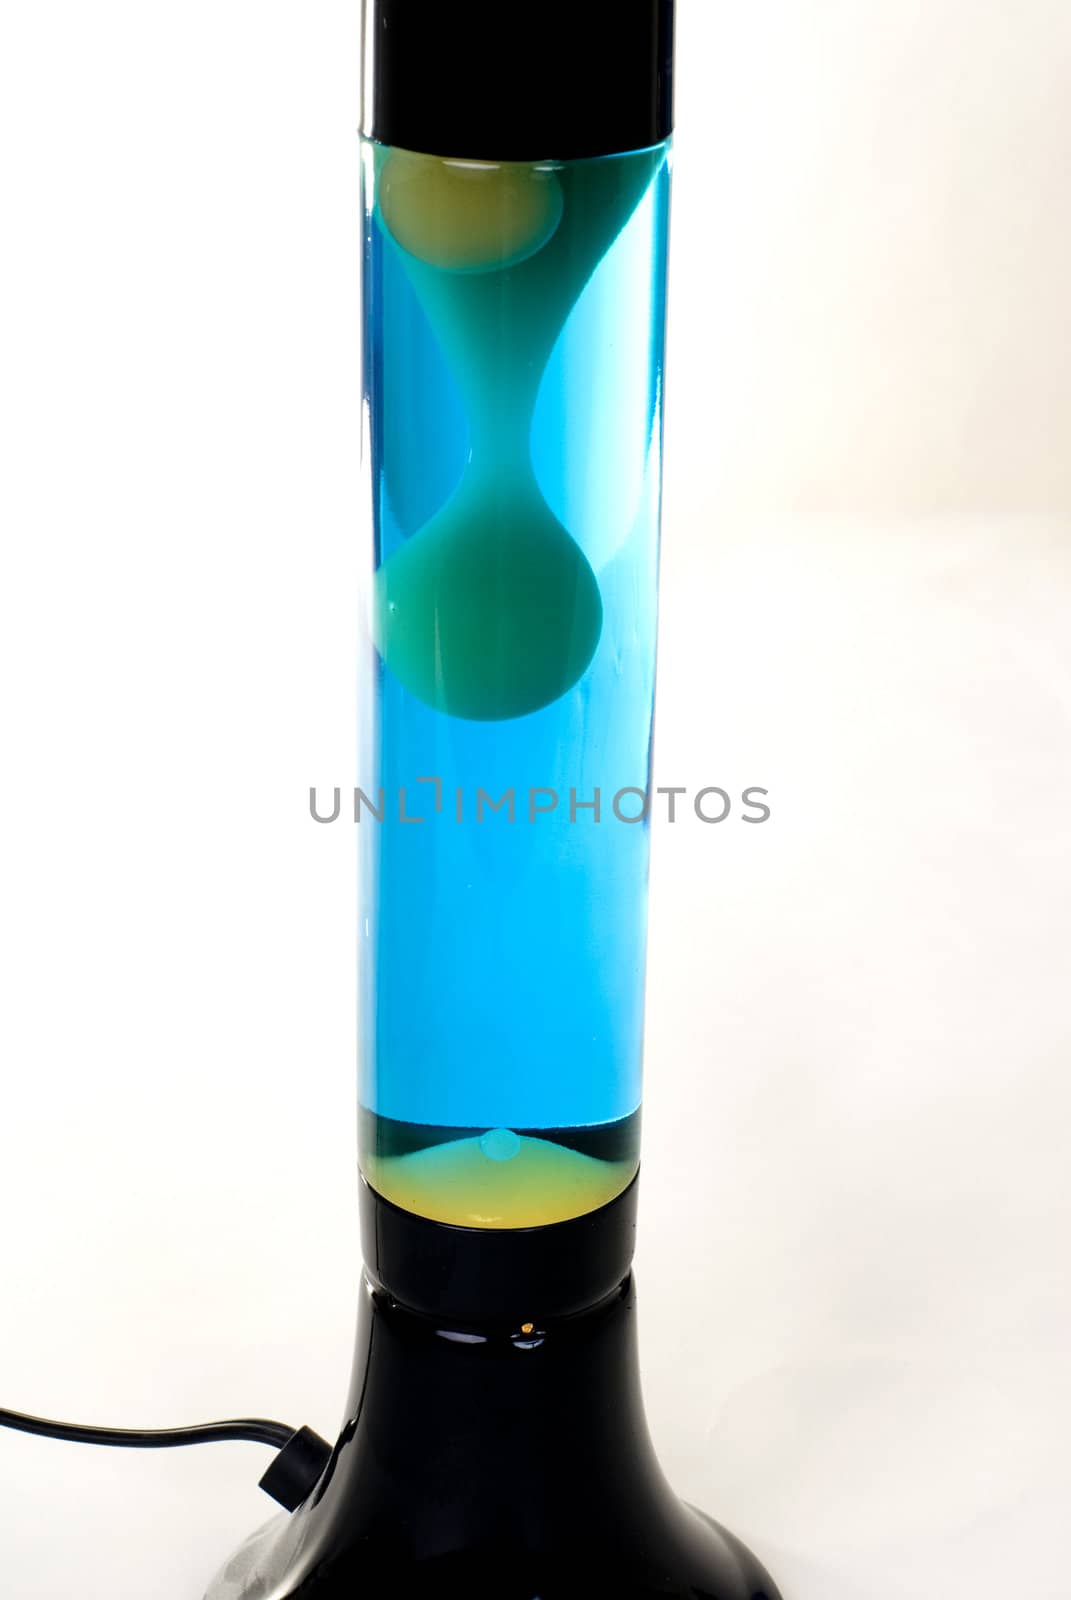 Blue Lava Lamp by eugenef